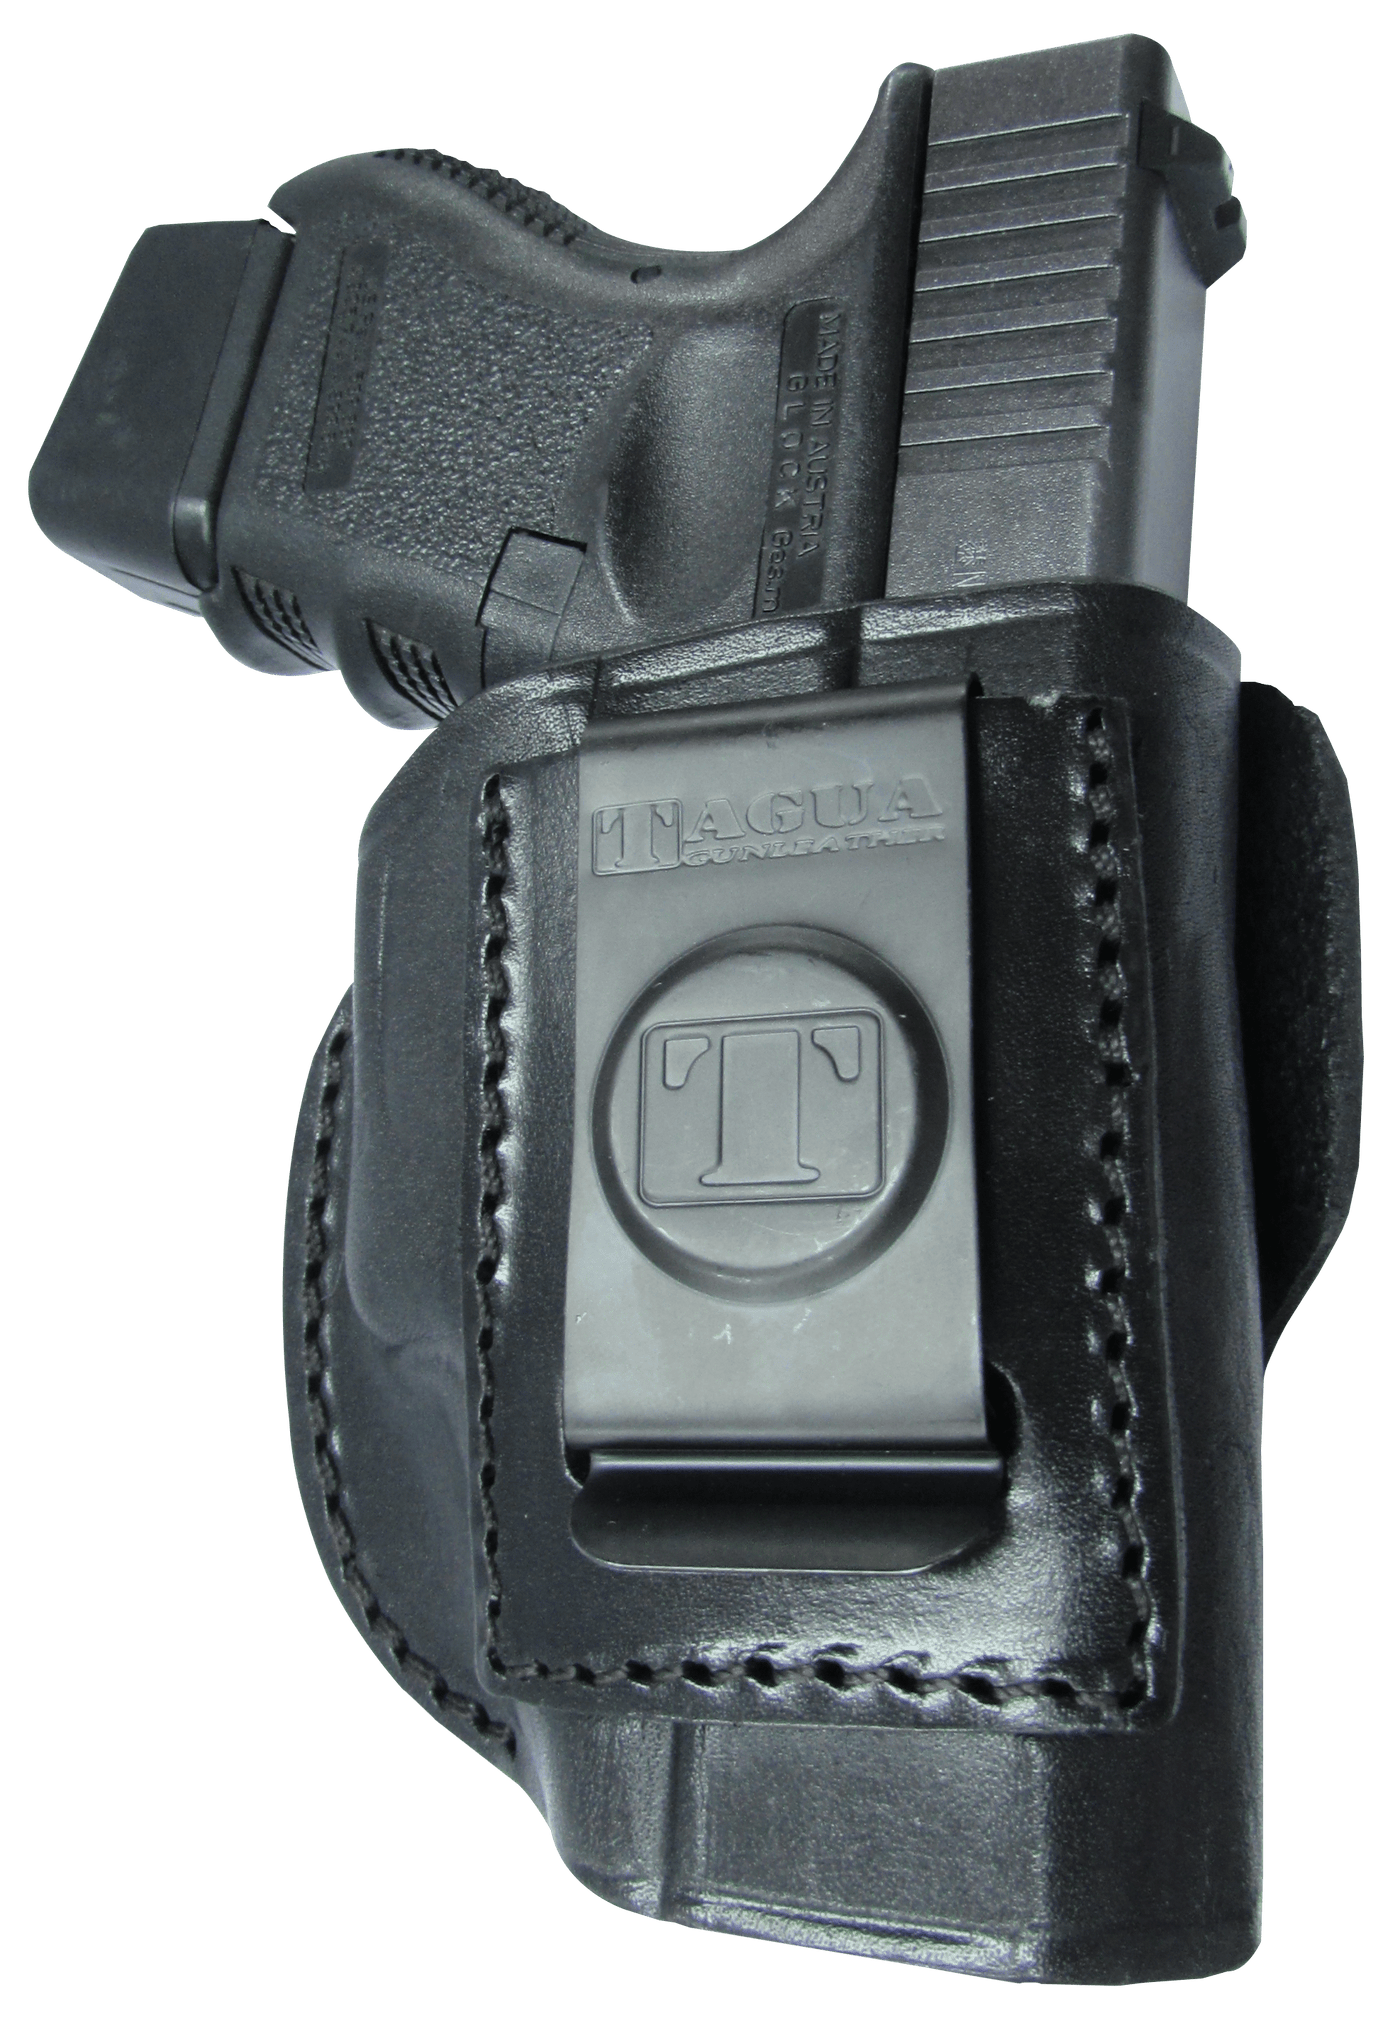 Tagua Tagua 4 In 1 Inside The Pant - Holster Glock 26/27/33 Blk Rh Holsters And Related Items